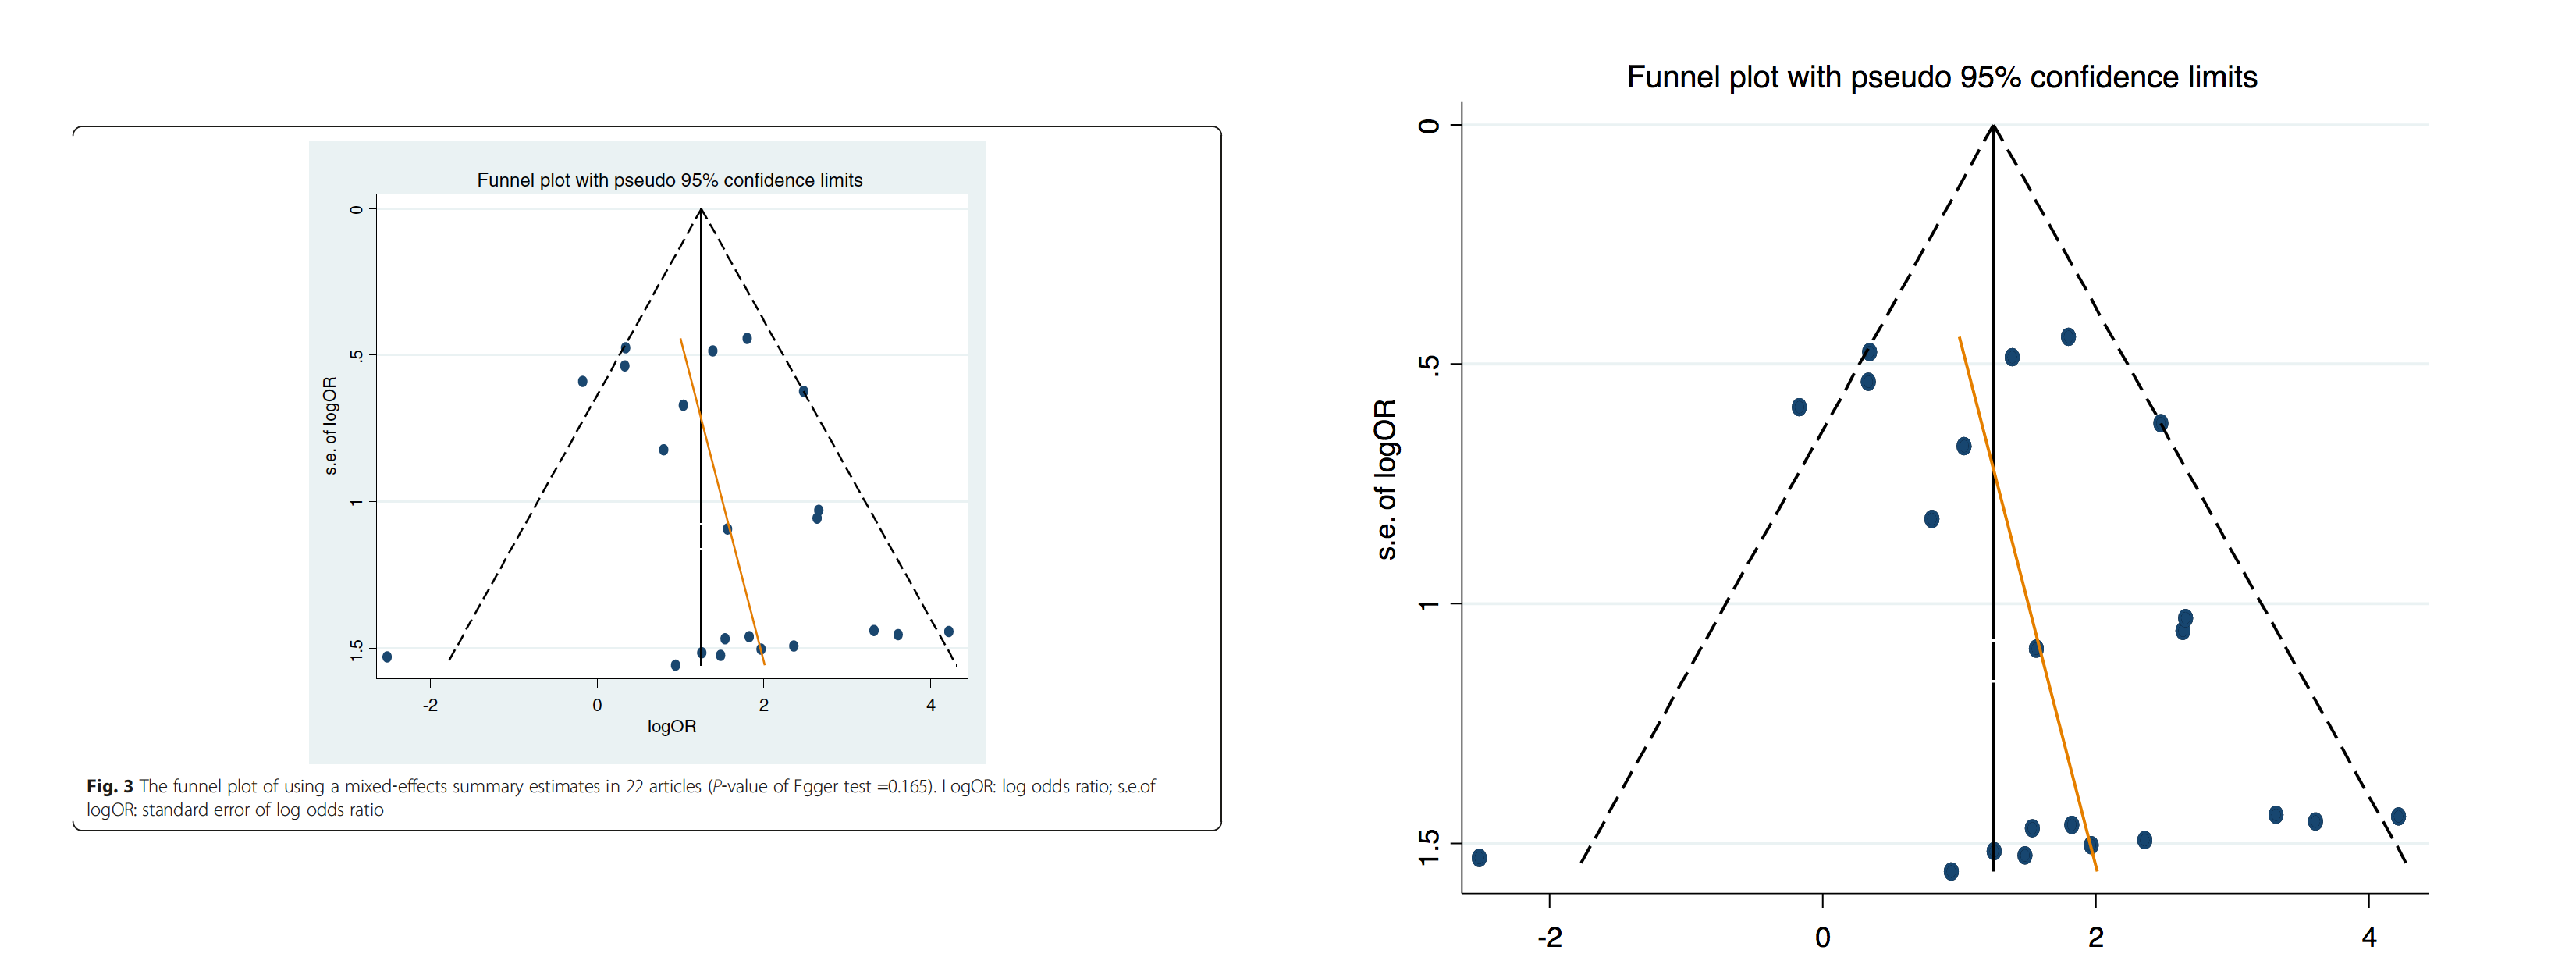 The original depiction of a funnel plot [left, reproduced under CC BY license from 10.1186/s13027-016-0058-9] and the manually extracted part that is subsequently ingested into the norma software (right).